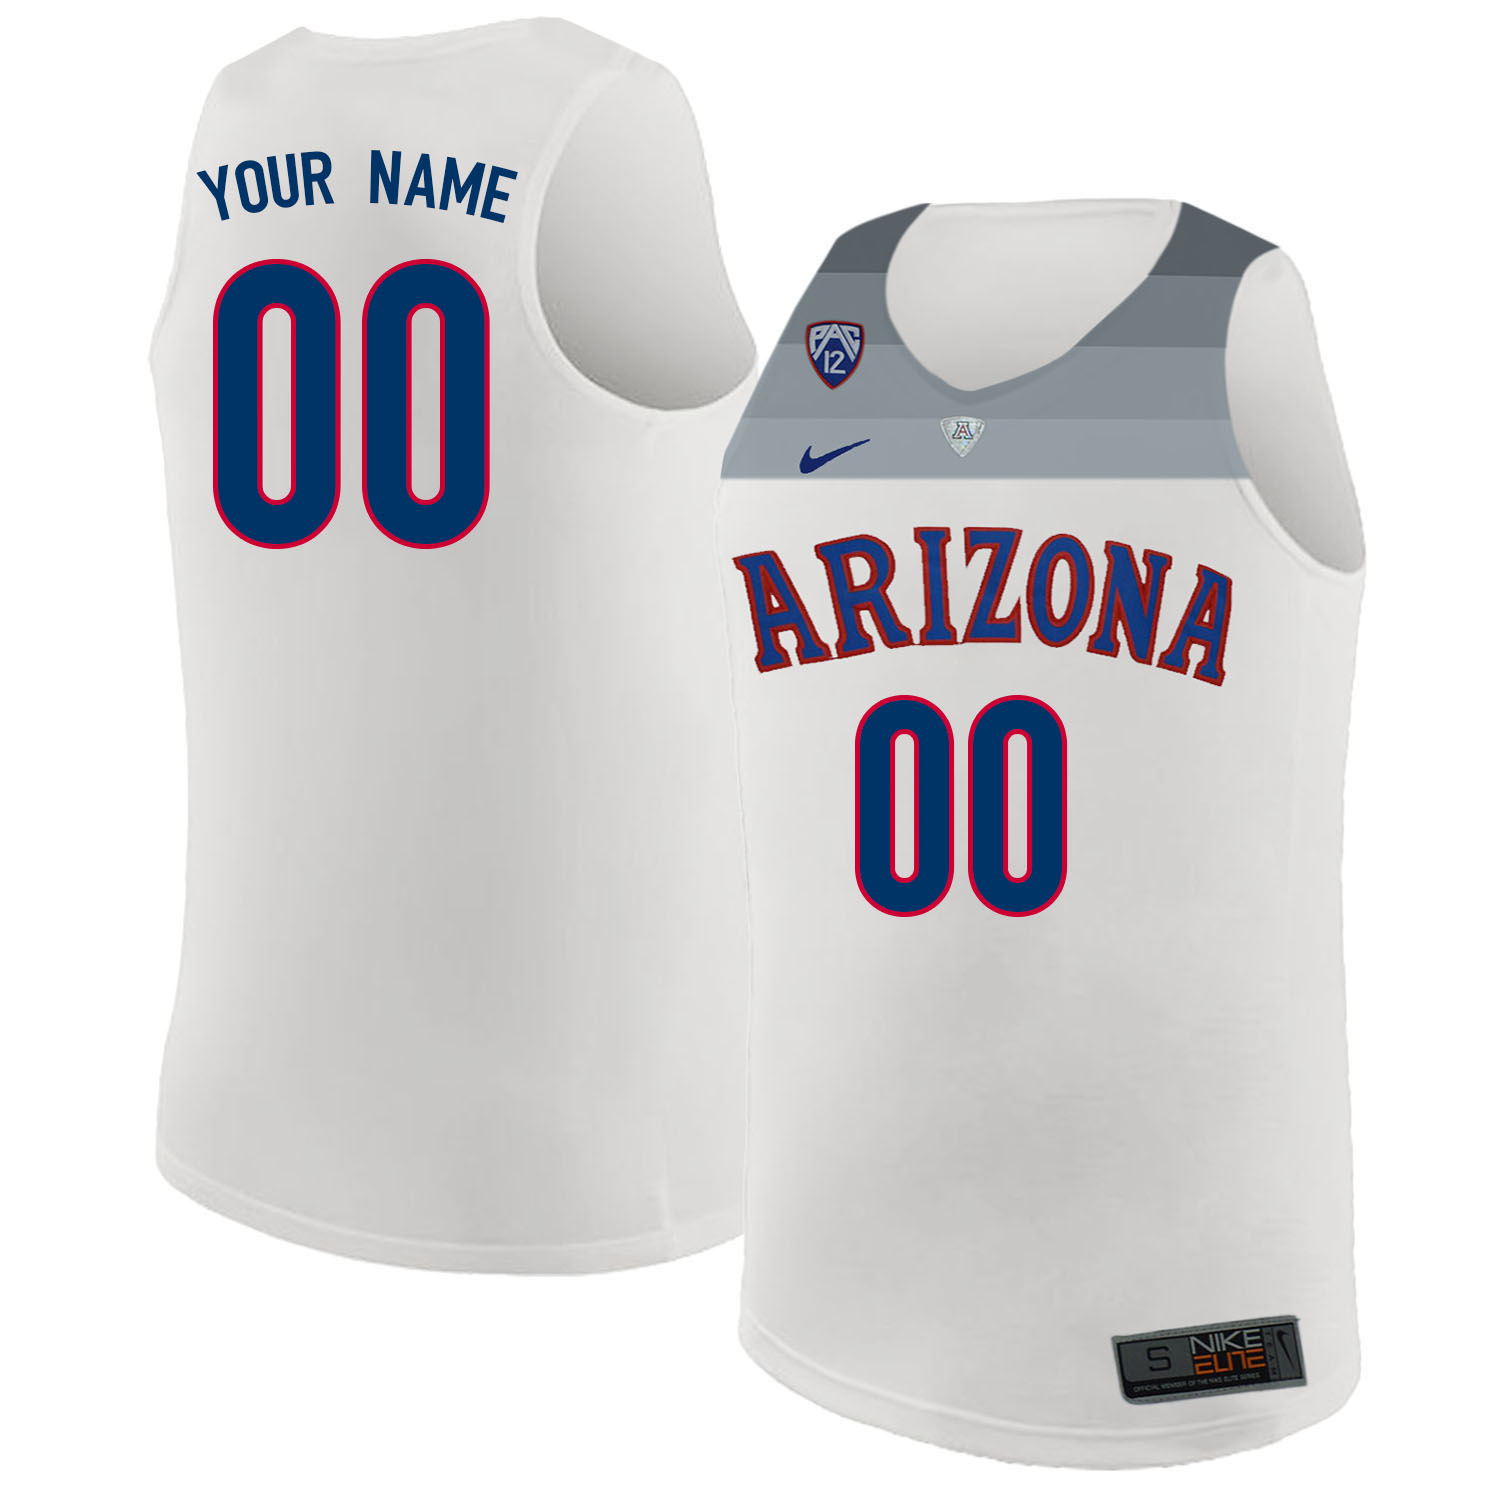 Custom Arizona Wildcats Name And Number College Basketball Jerseys Stitched-White